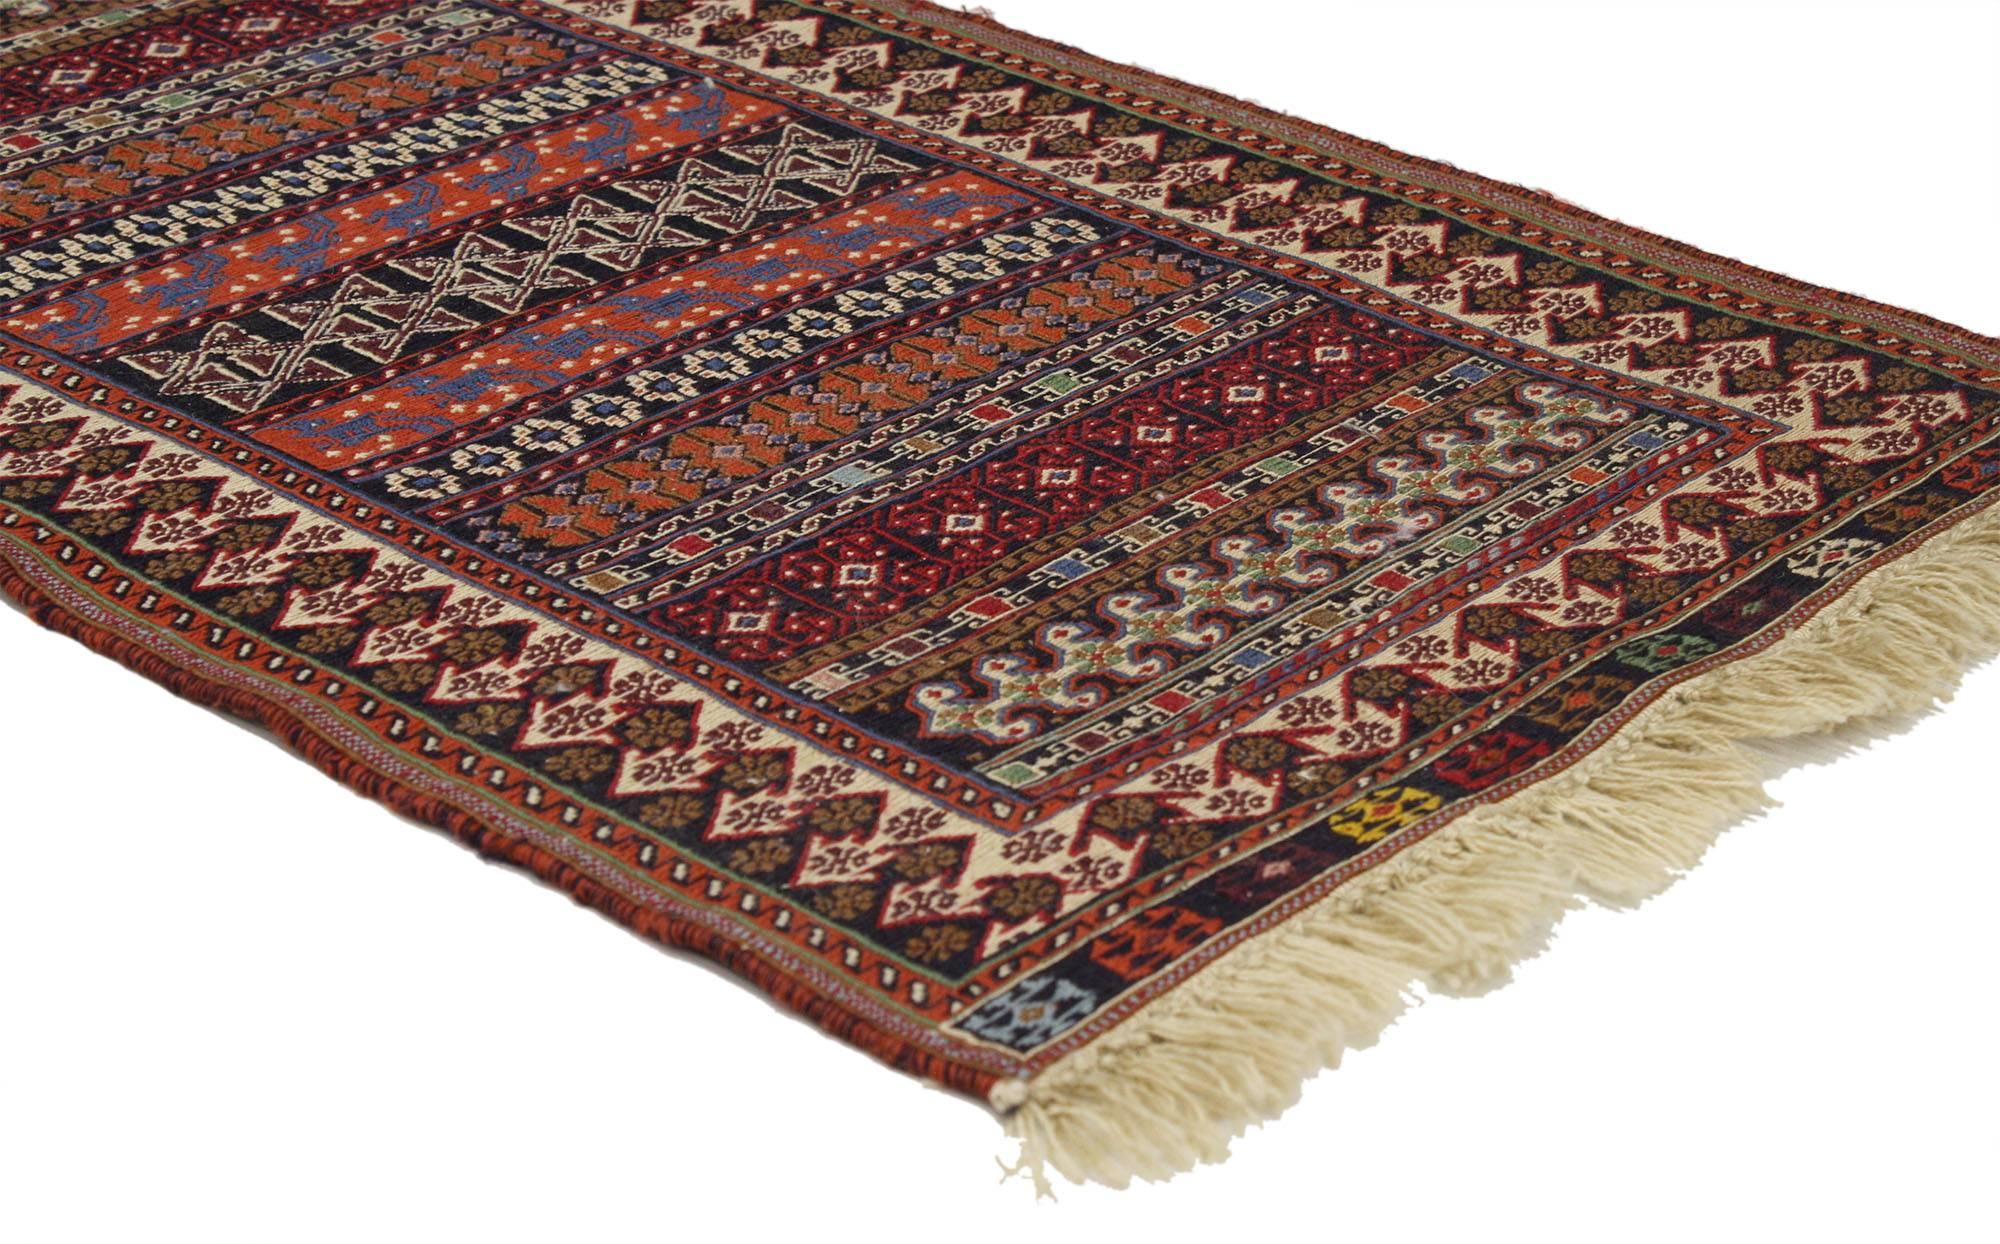 76986, vintage Turkish Kilim rug, small flat-weave rug. This handwoven wool vintage Turkish Kilim rug features an array of geometric tribal motifs. Intricate, colorful and full of ancient symbolism, this small flat-weave rug is well-curated,